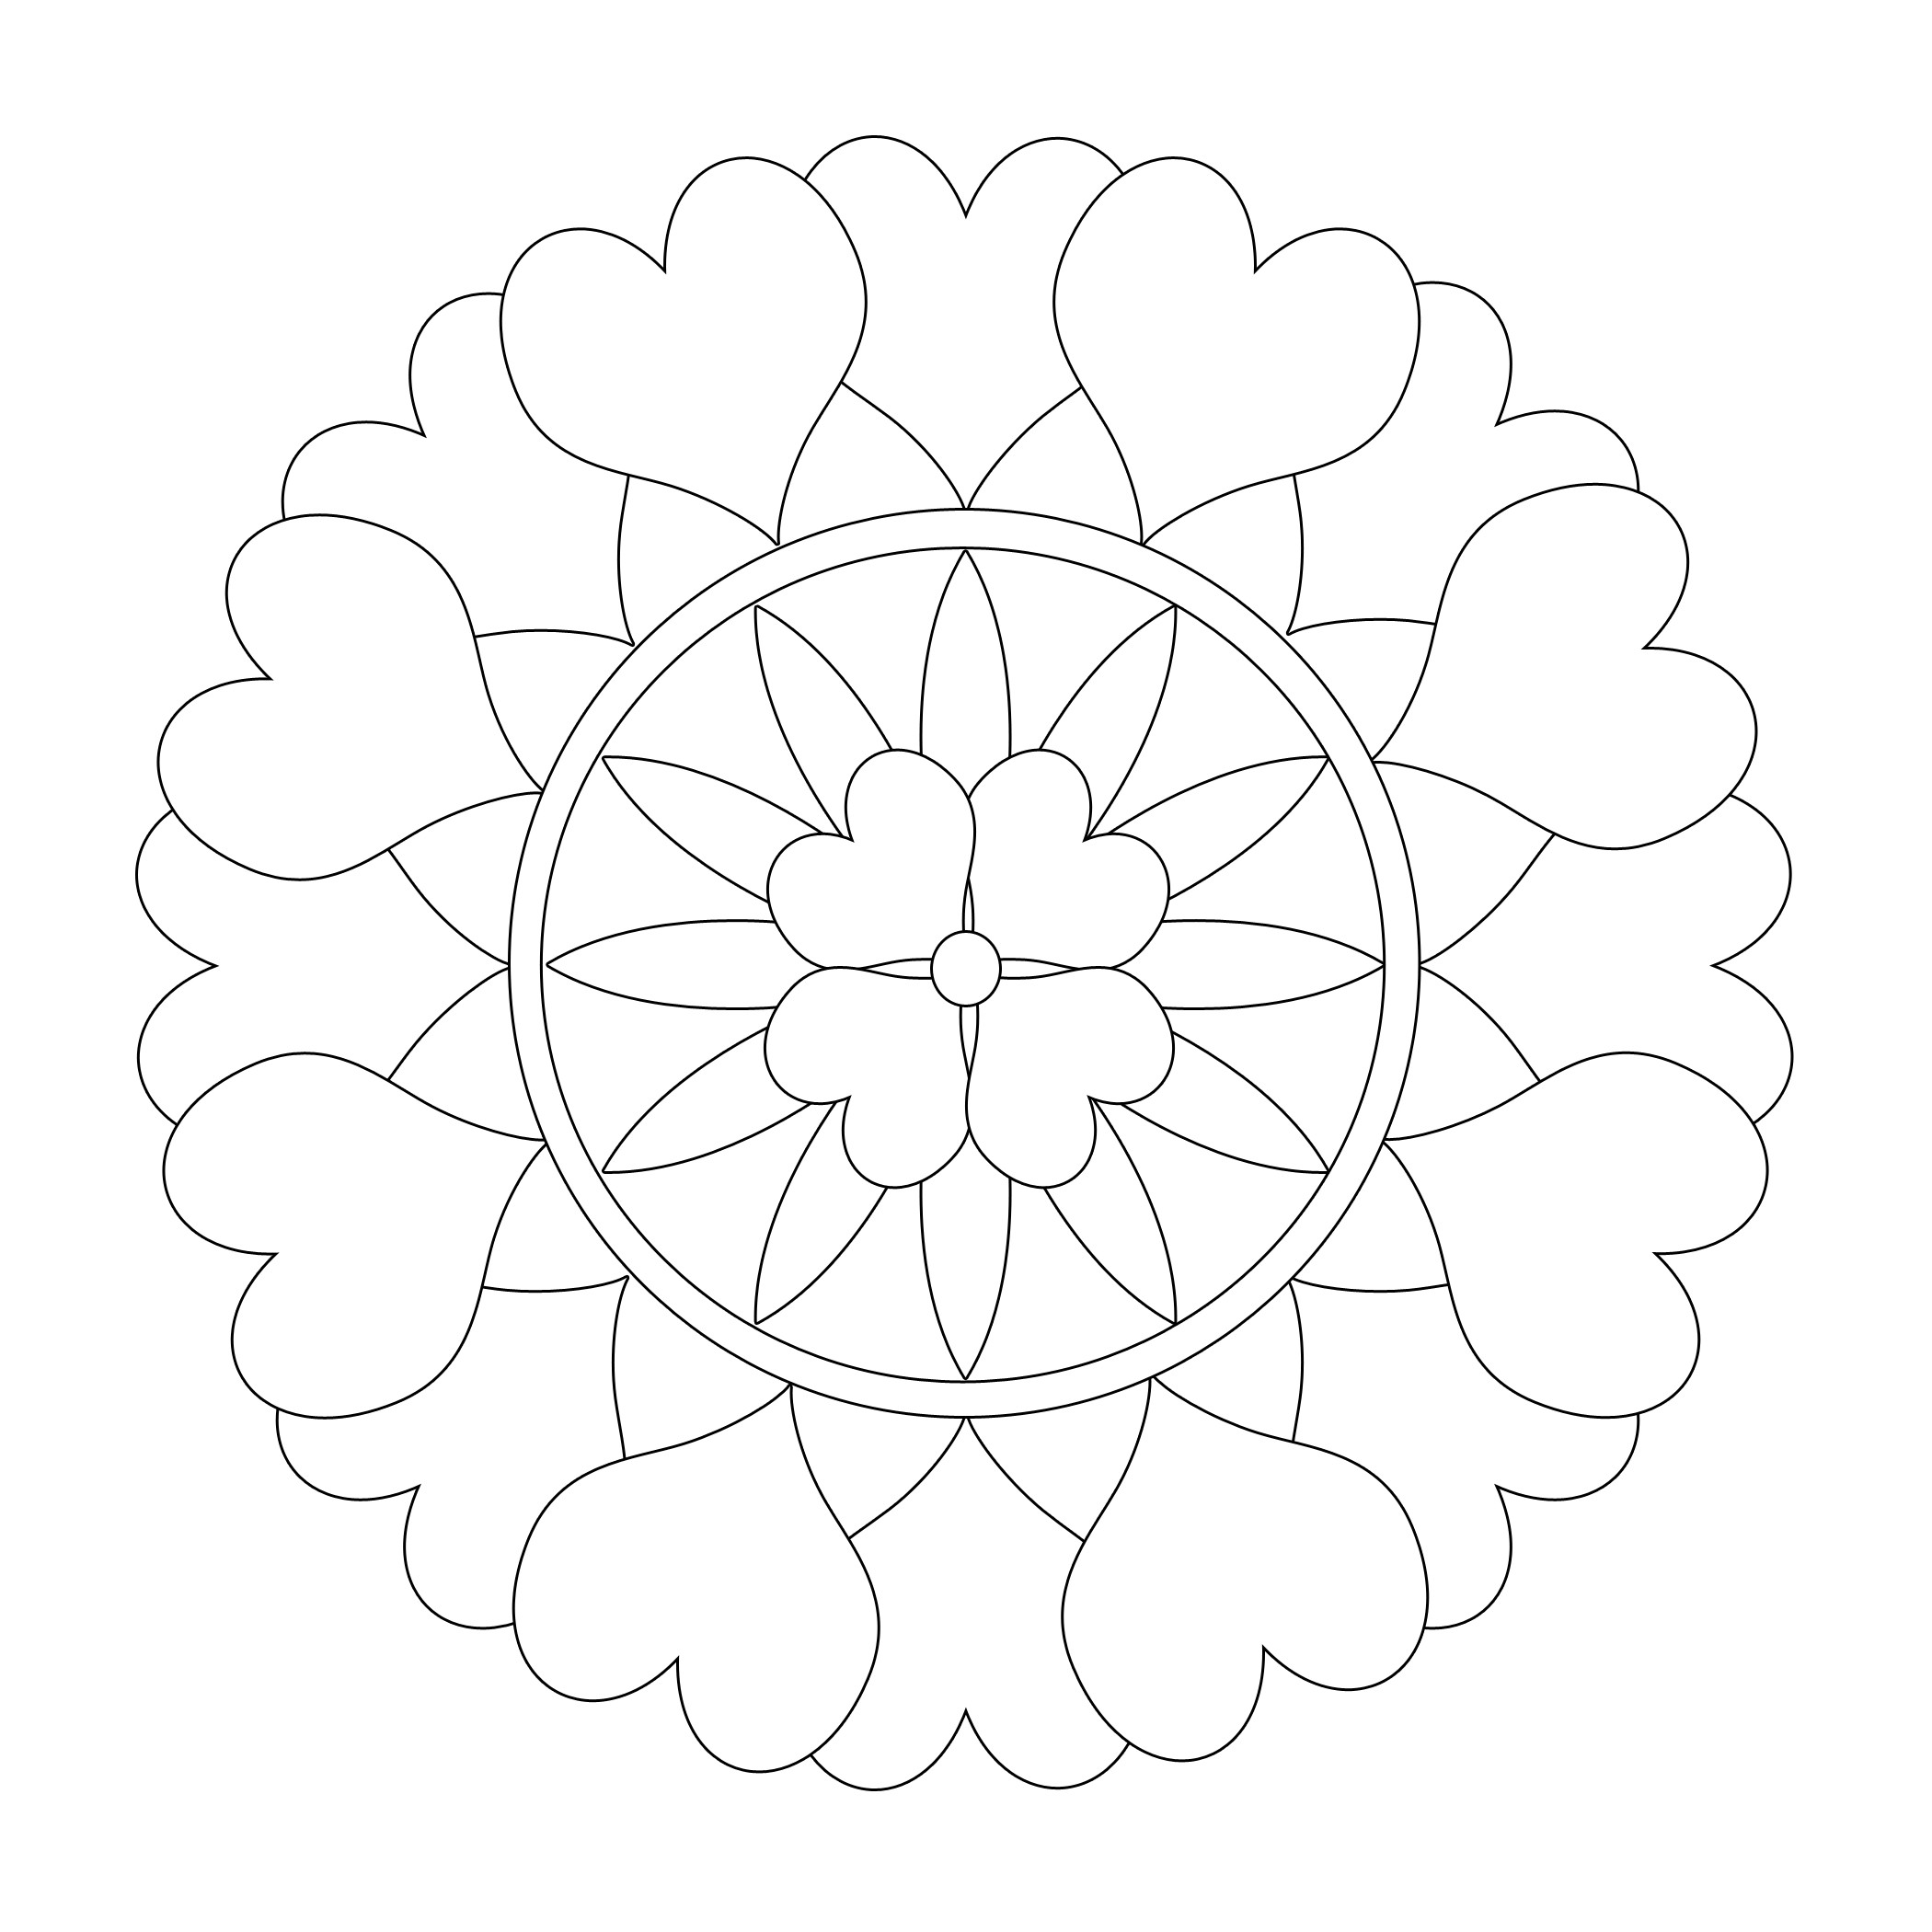 Mandala Coloring Books For Kids
 Free Printable Mandala Coloring Pages For Adults Best